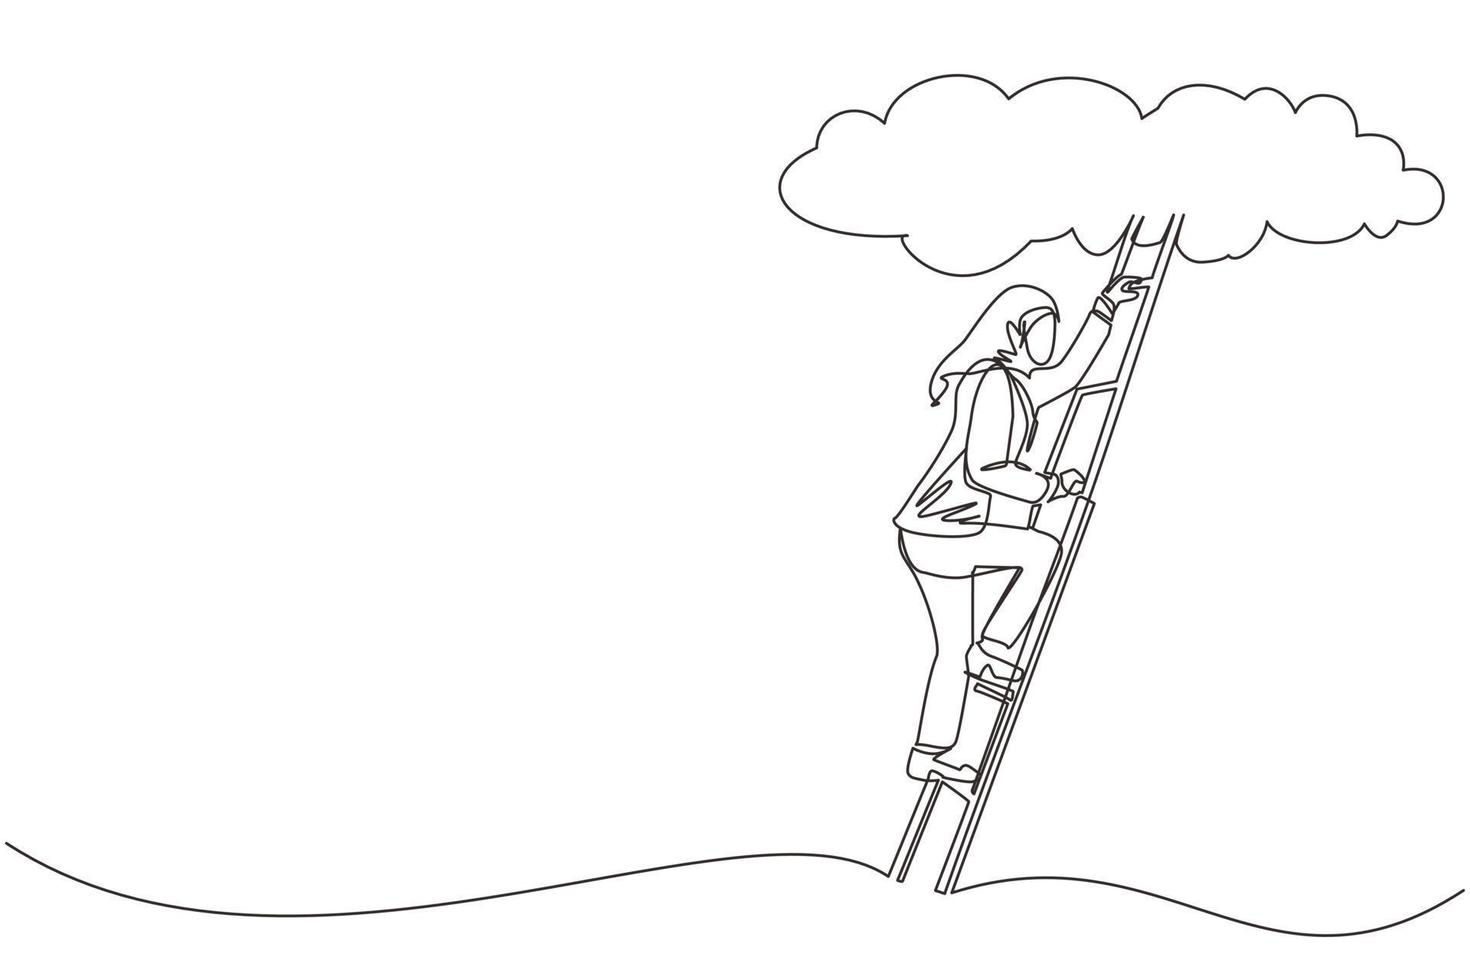 Continuous one line drawing Arab businesswoman climbing up career ladder to cloud. Successful rising business development. Professional growth promotion. Single line design vector graphic illustration